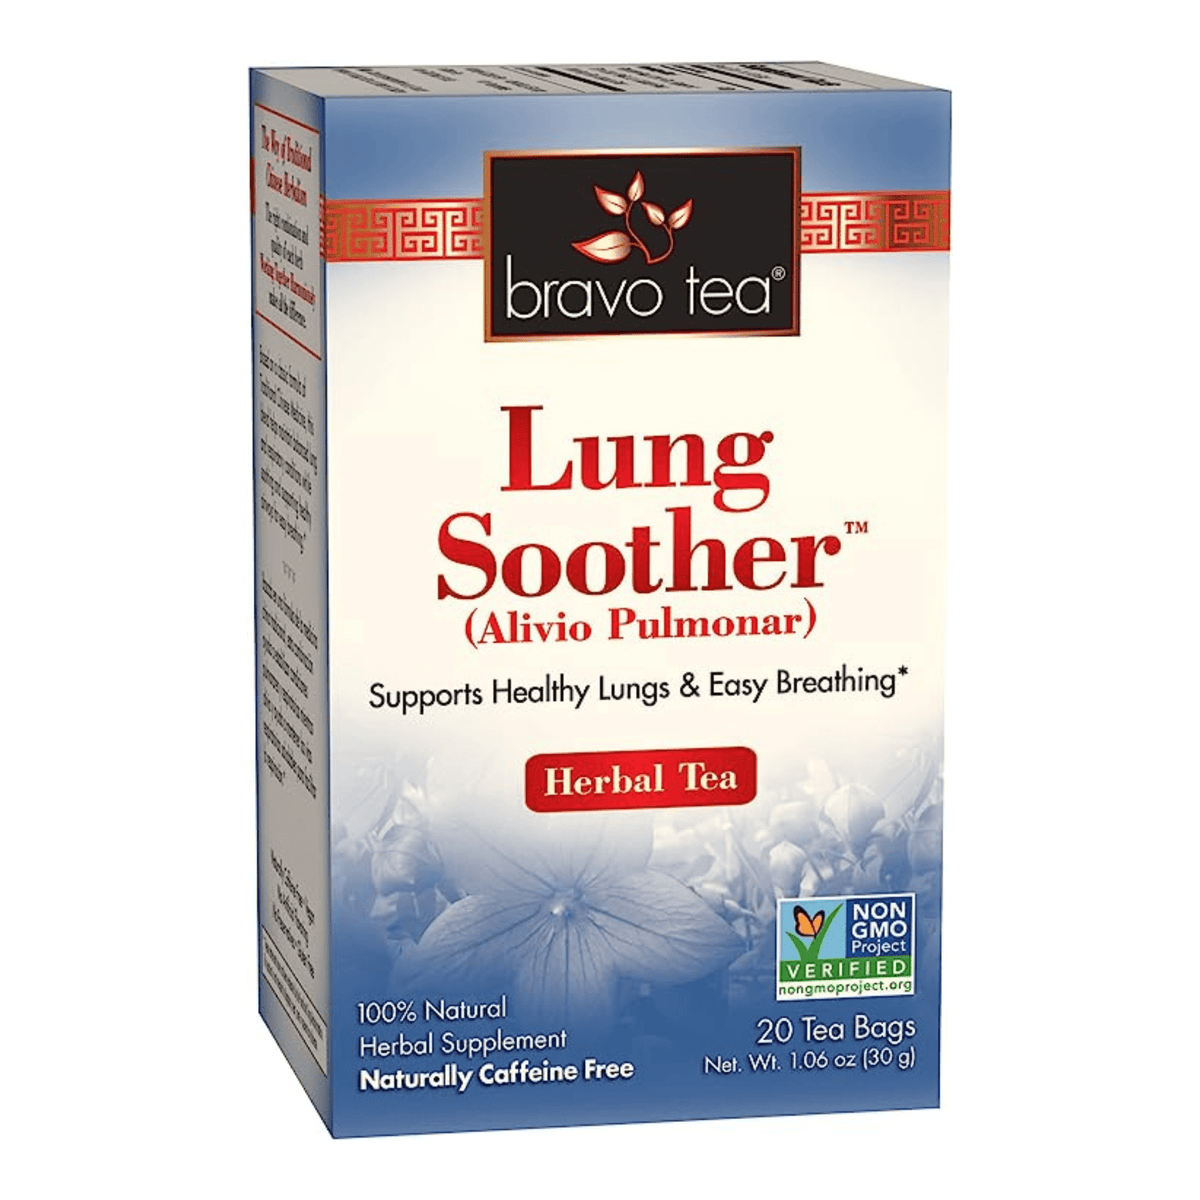 Primary Image of Lung Soother Tea Bags